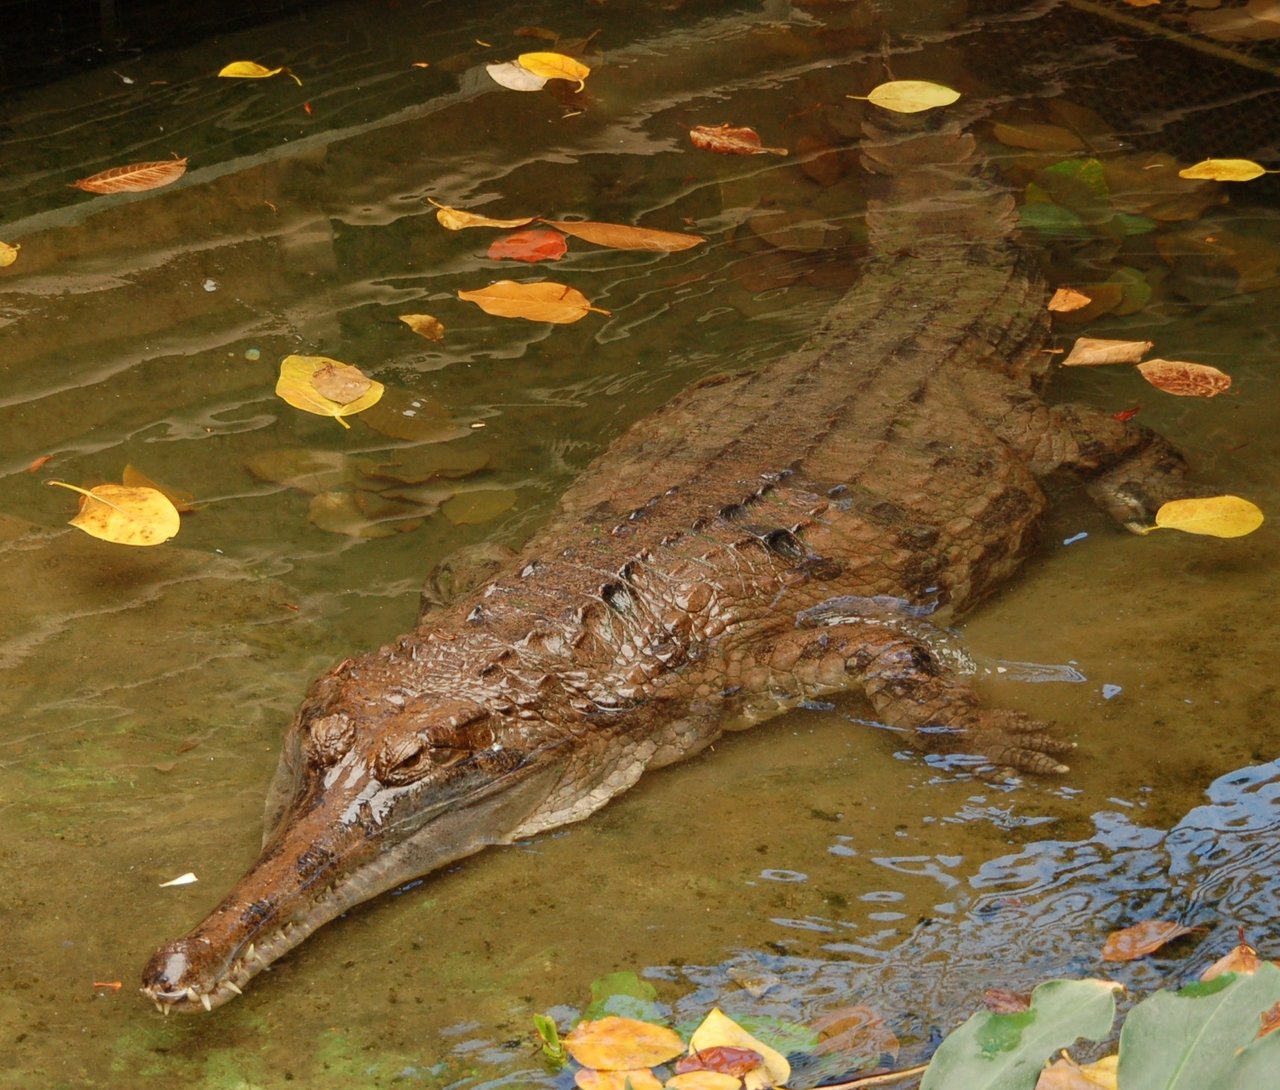 A new species of crocodile has been described for the first time in over 80  years!